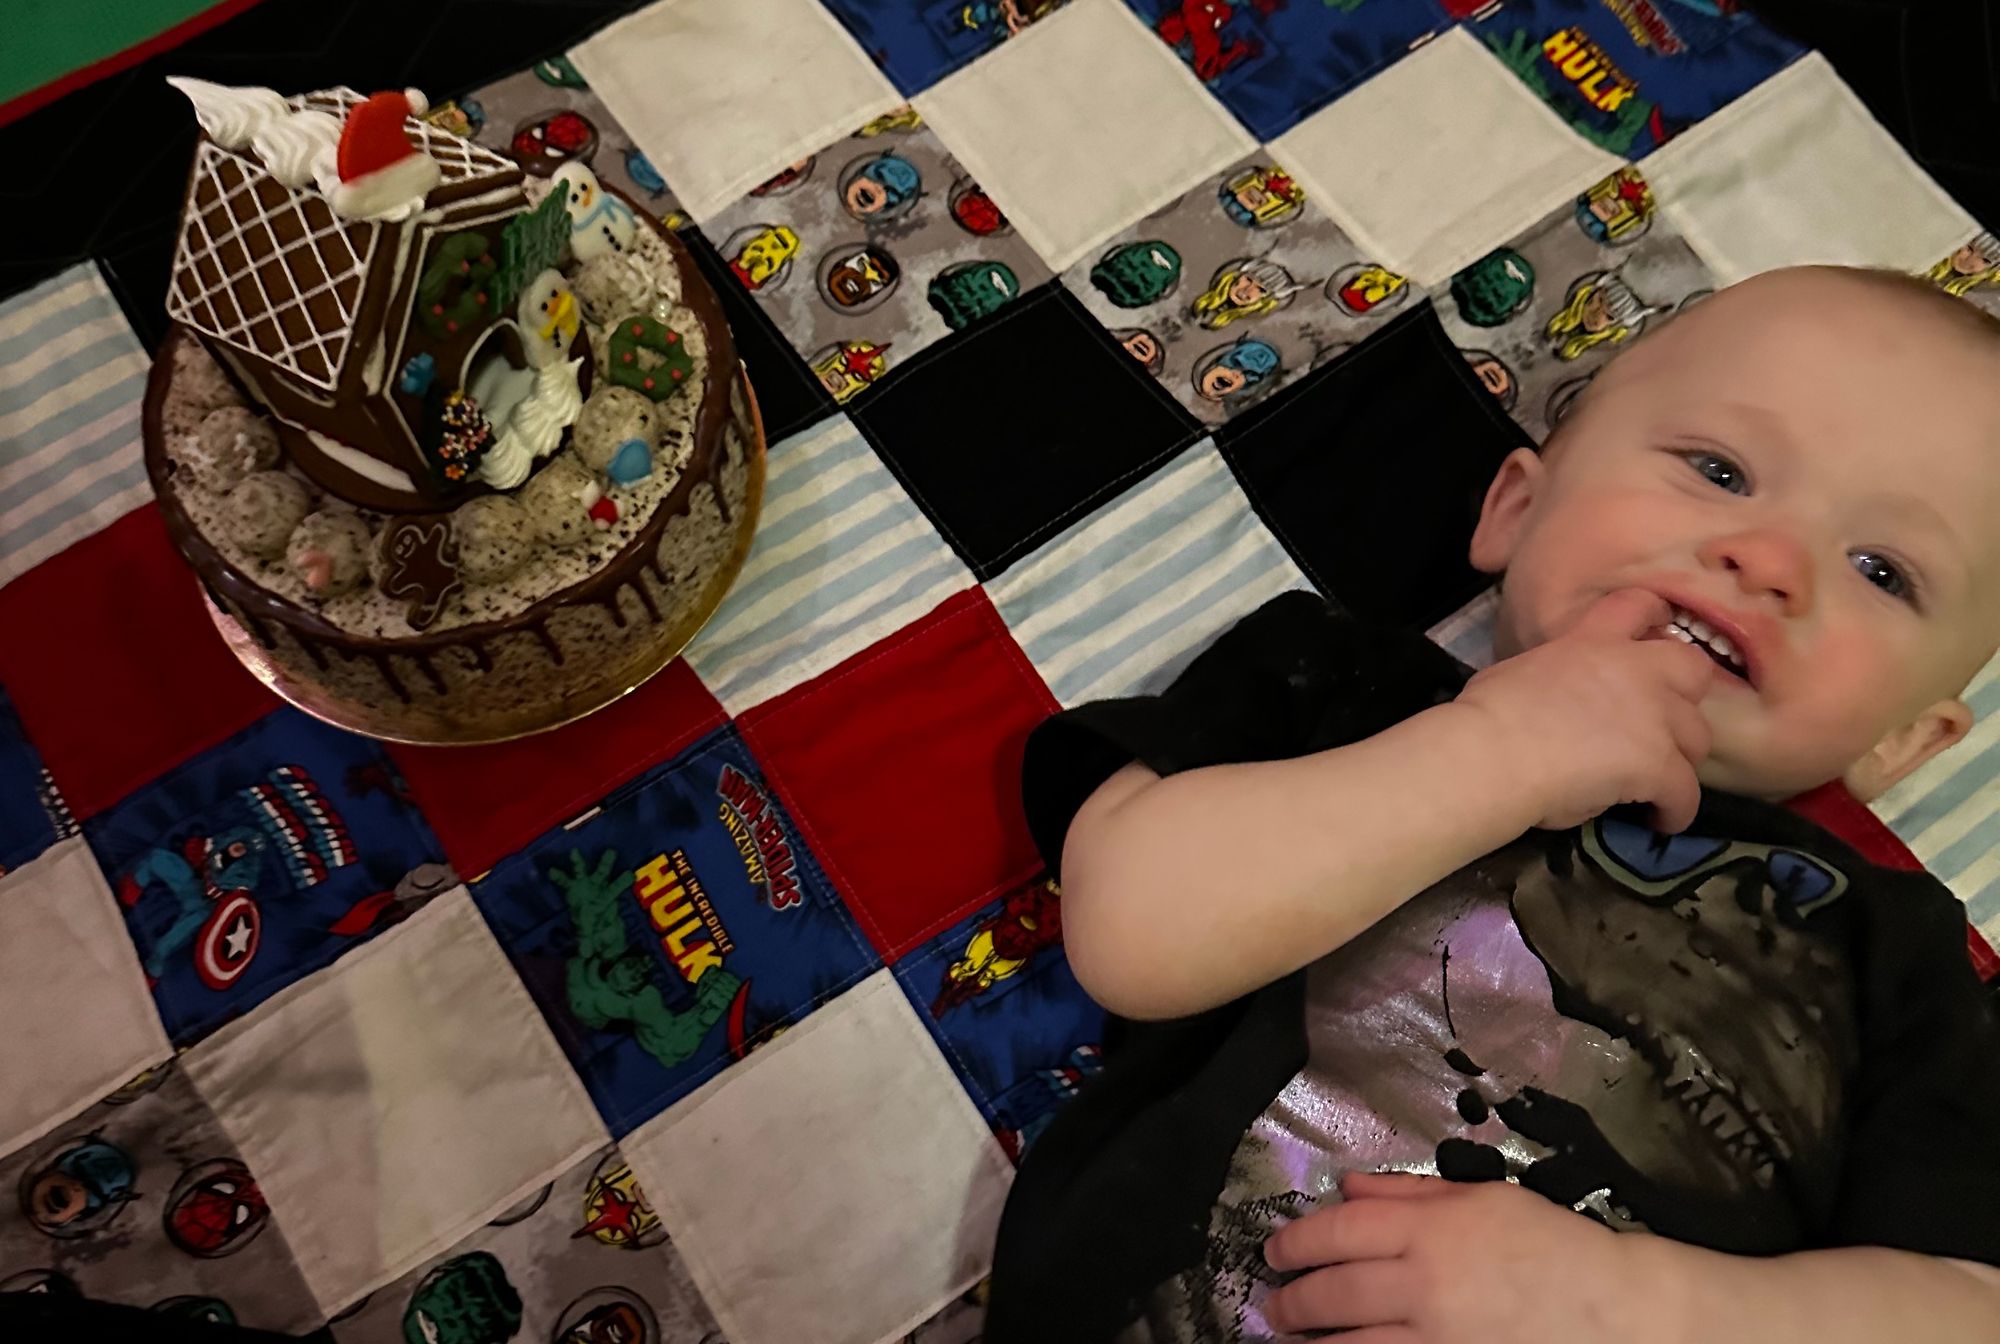 Freddie lying next to a cake adorned with a gingerbread house.